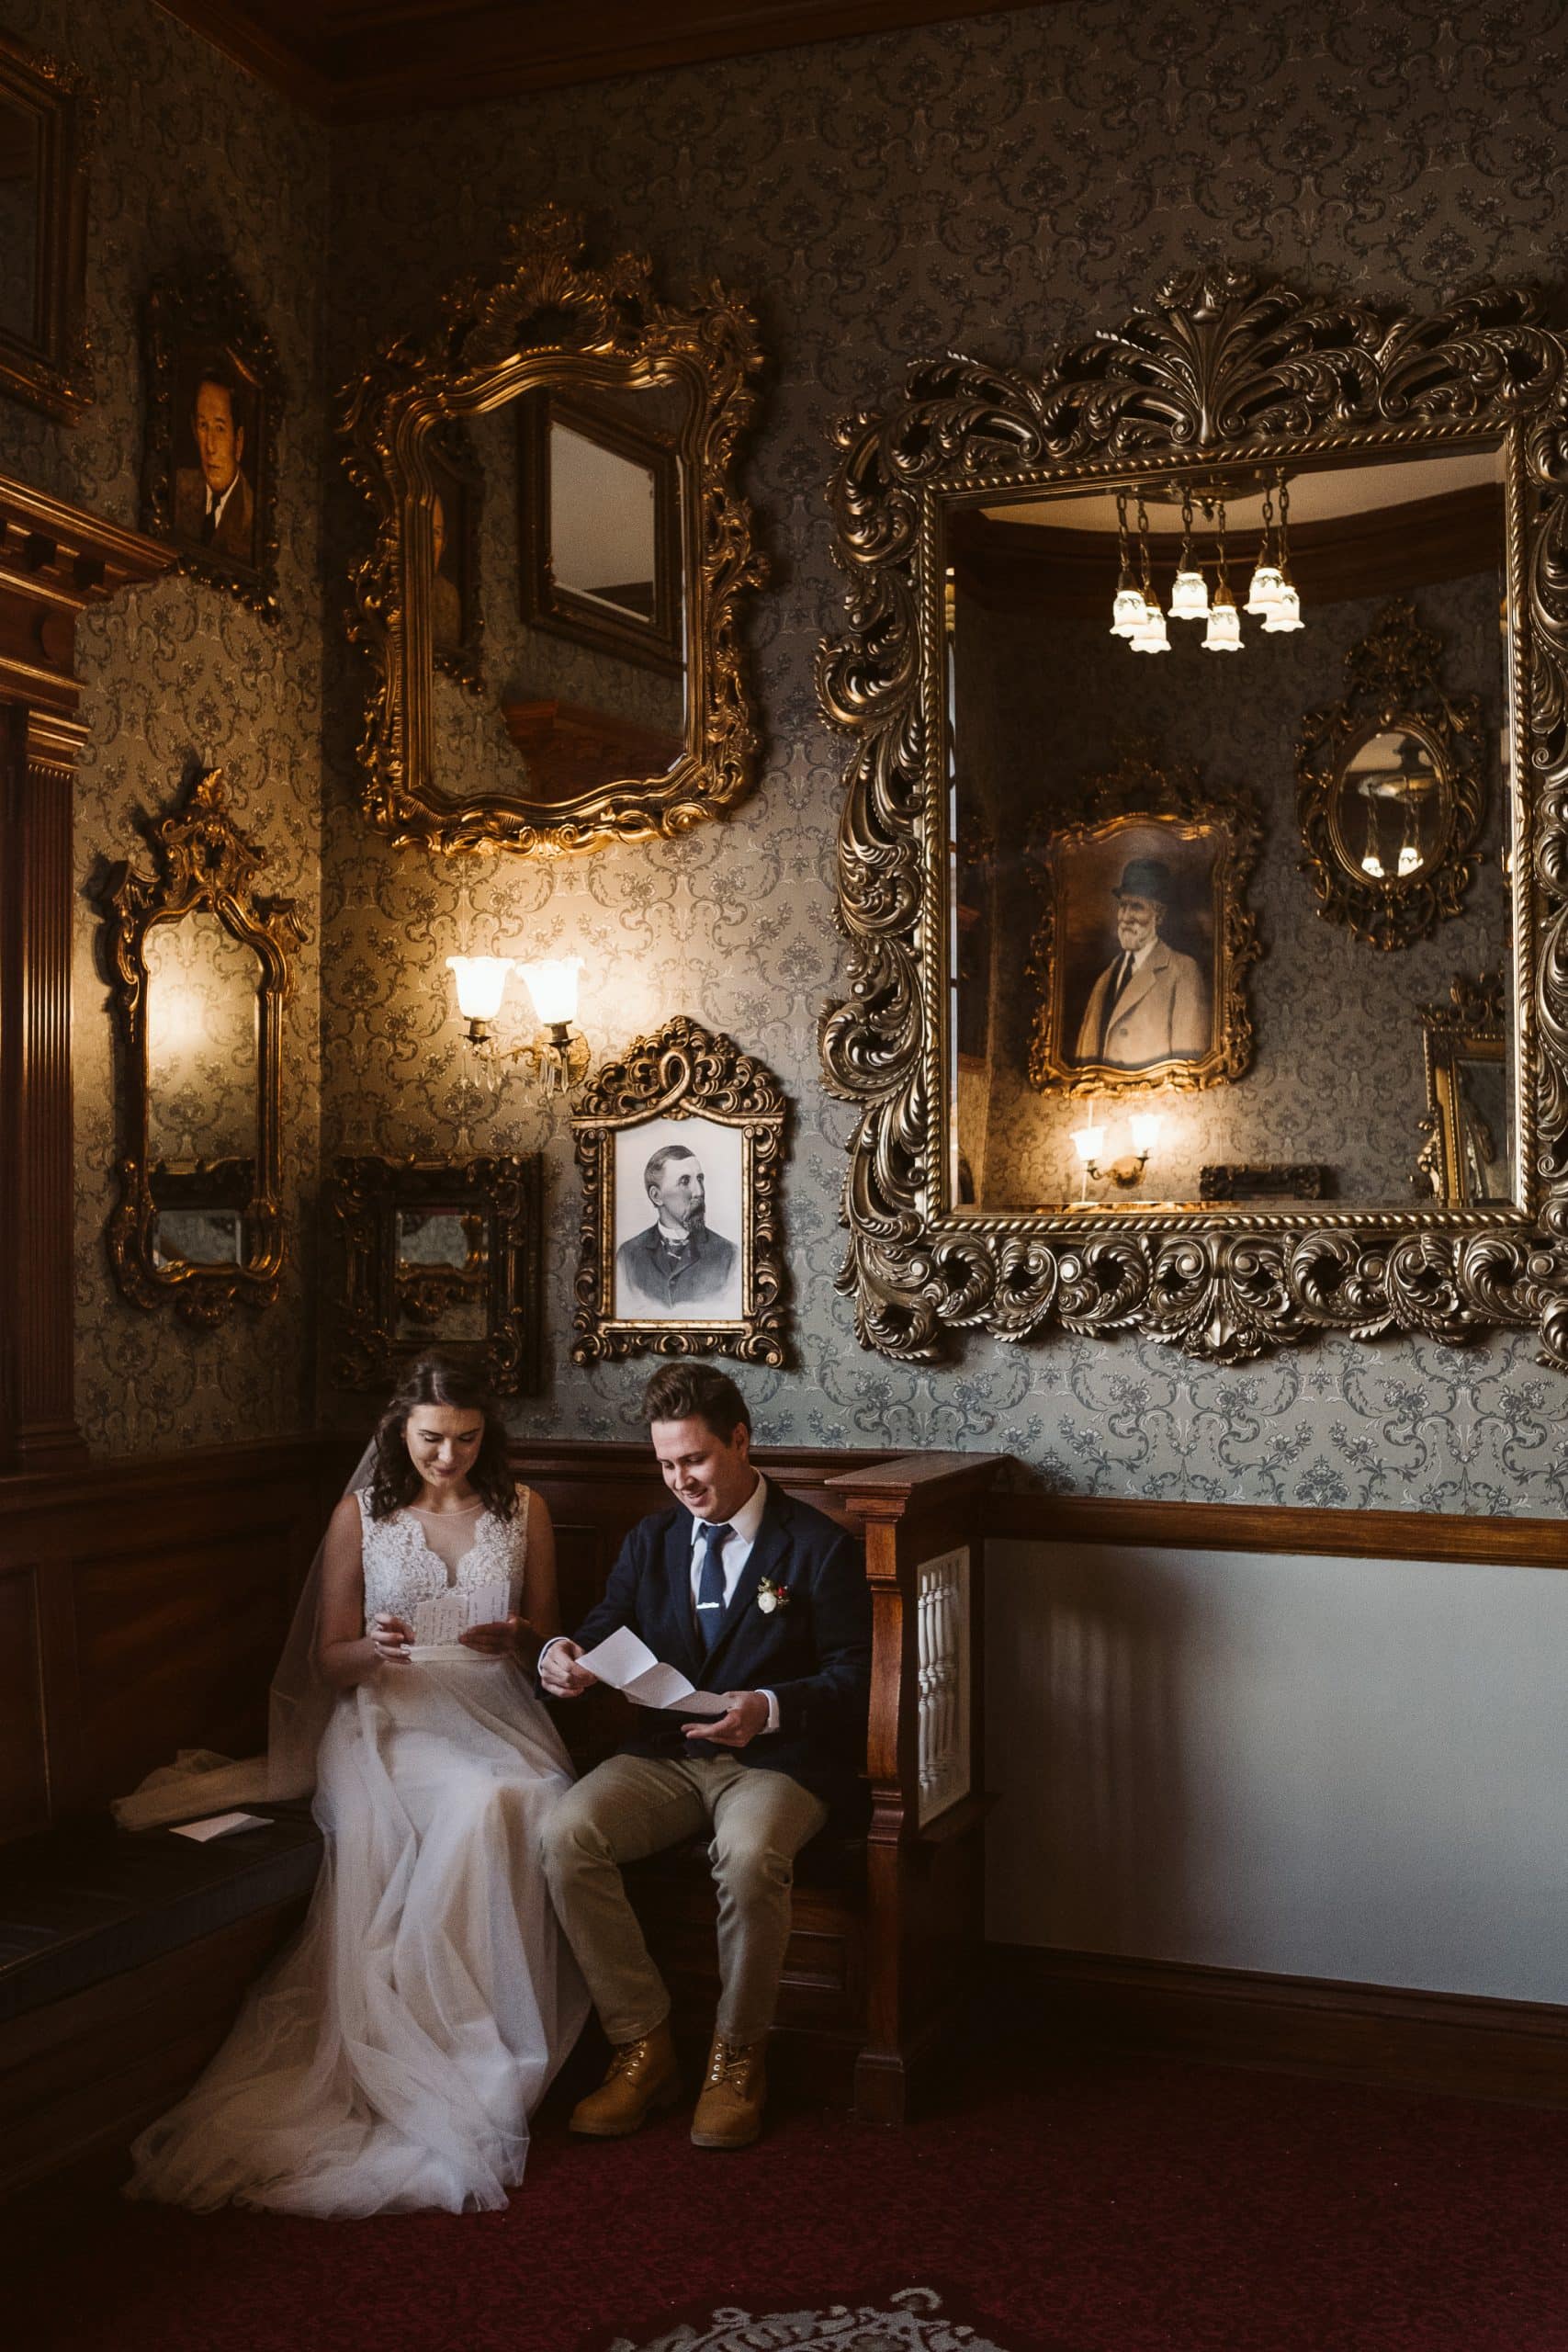 Bride and groom read private letters to each other at the Stanley Hotel in Estes Park.